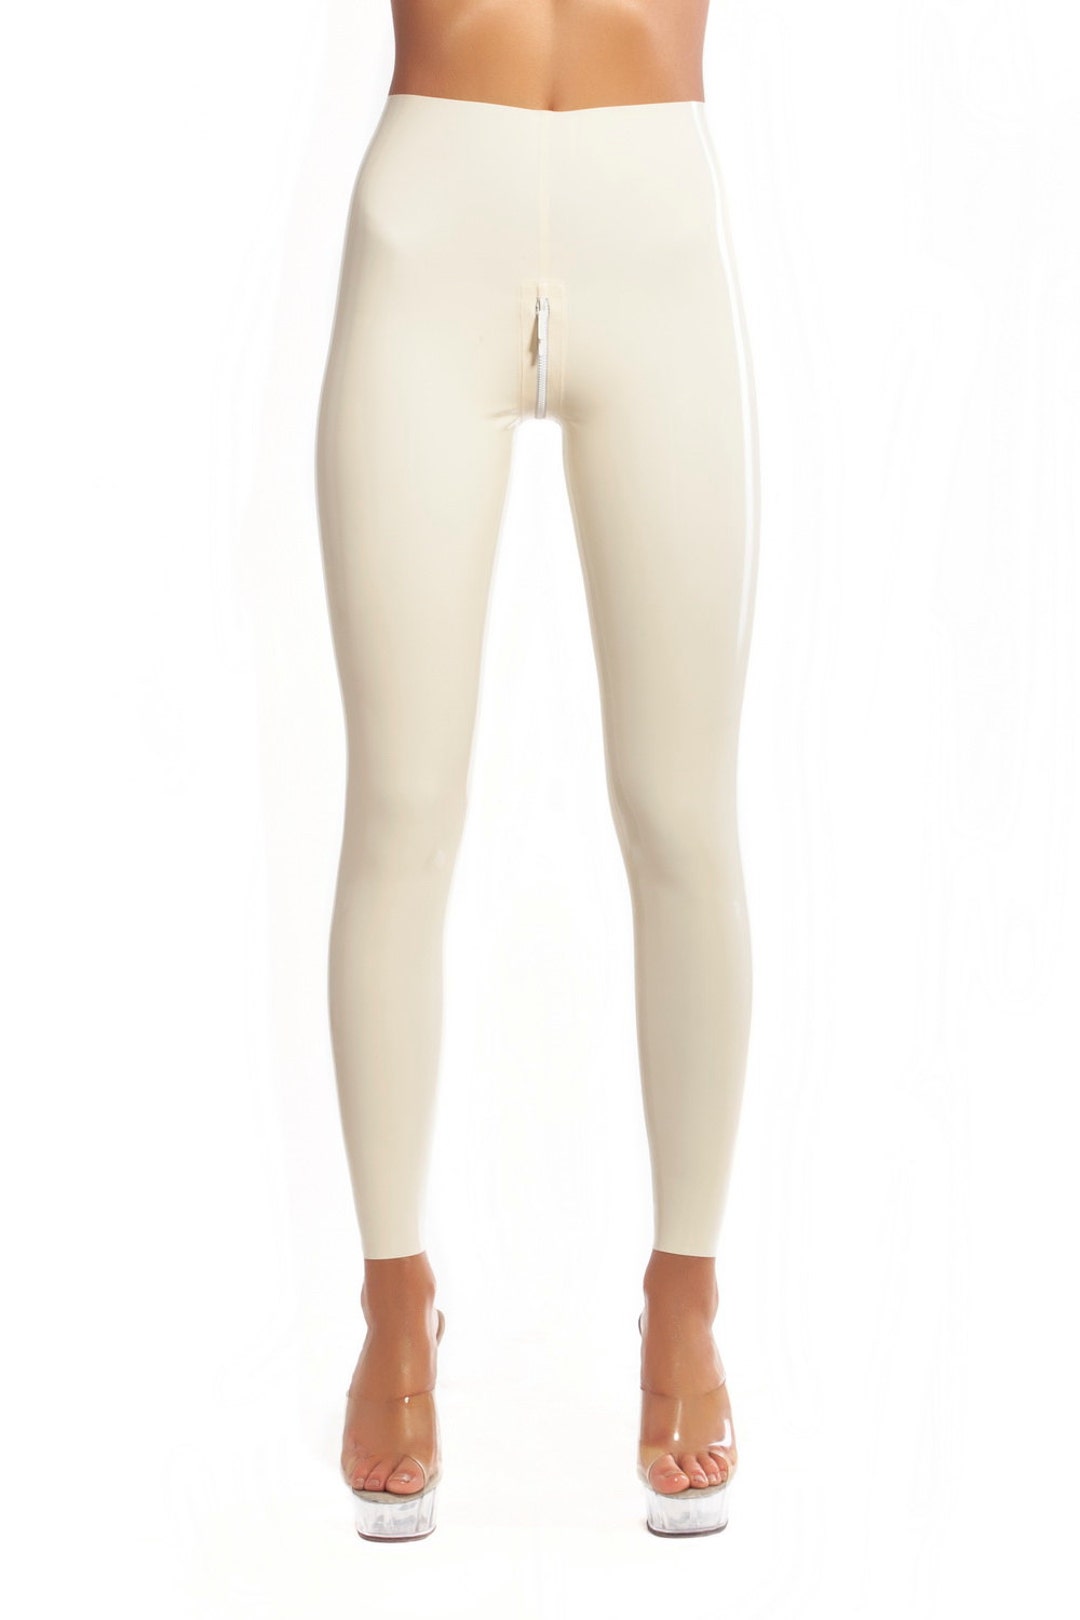 White Latex Leggings With Double Slider Crotch Zipper -  Canada